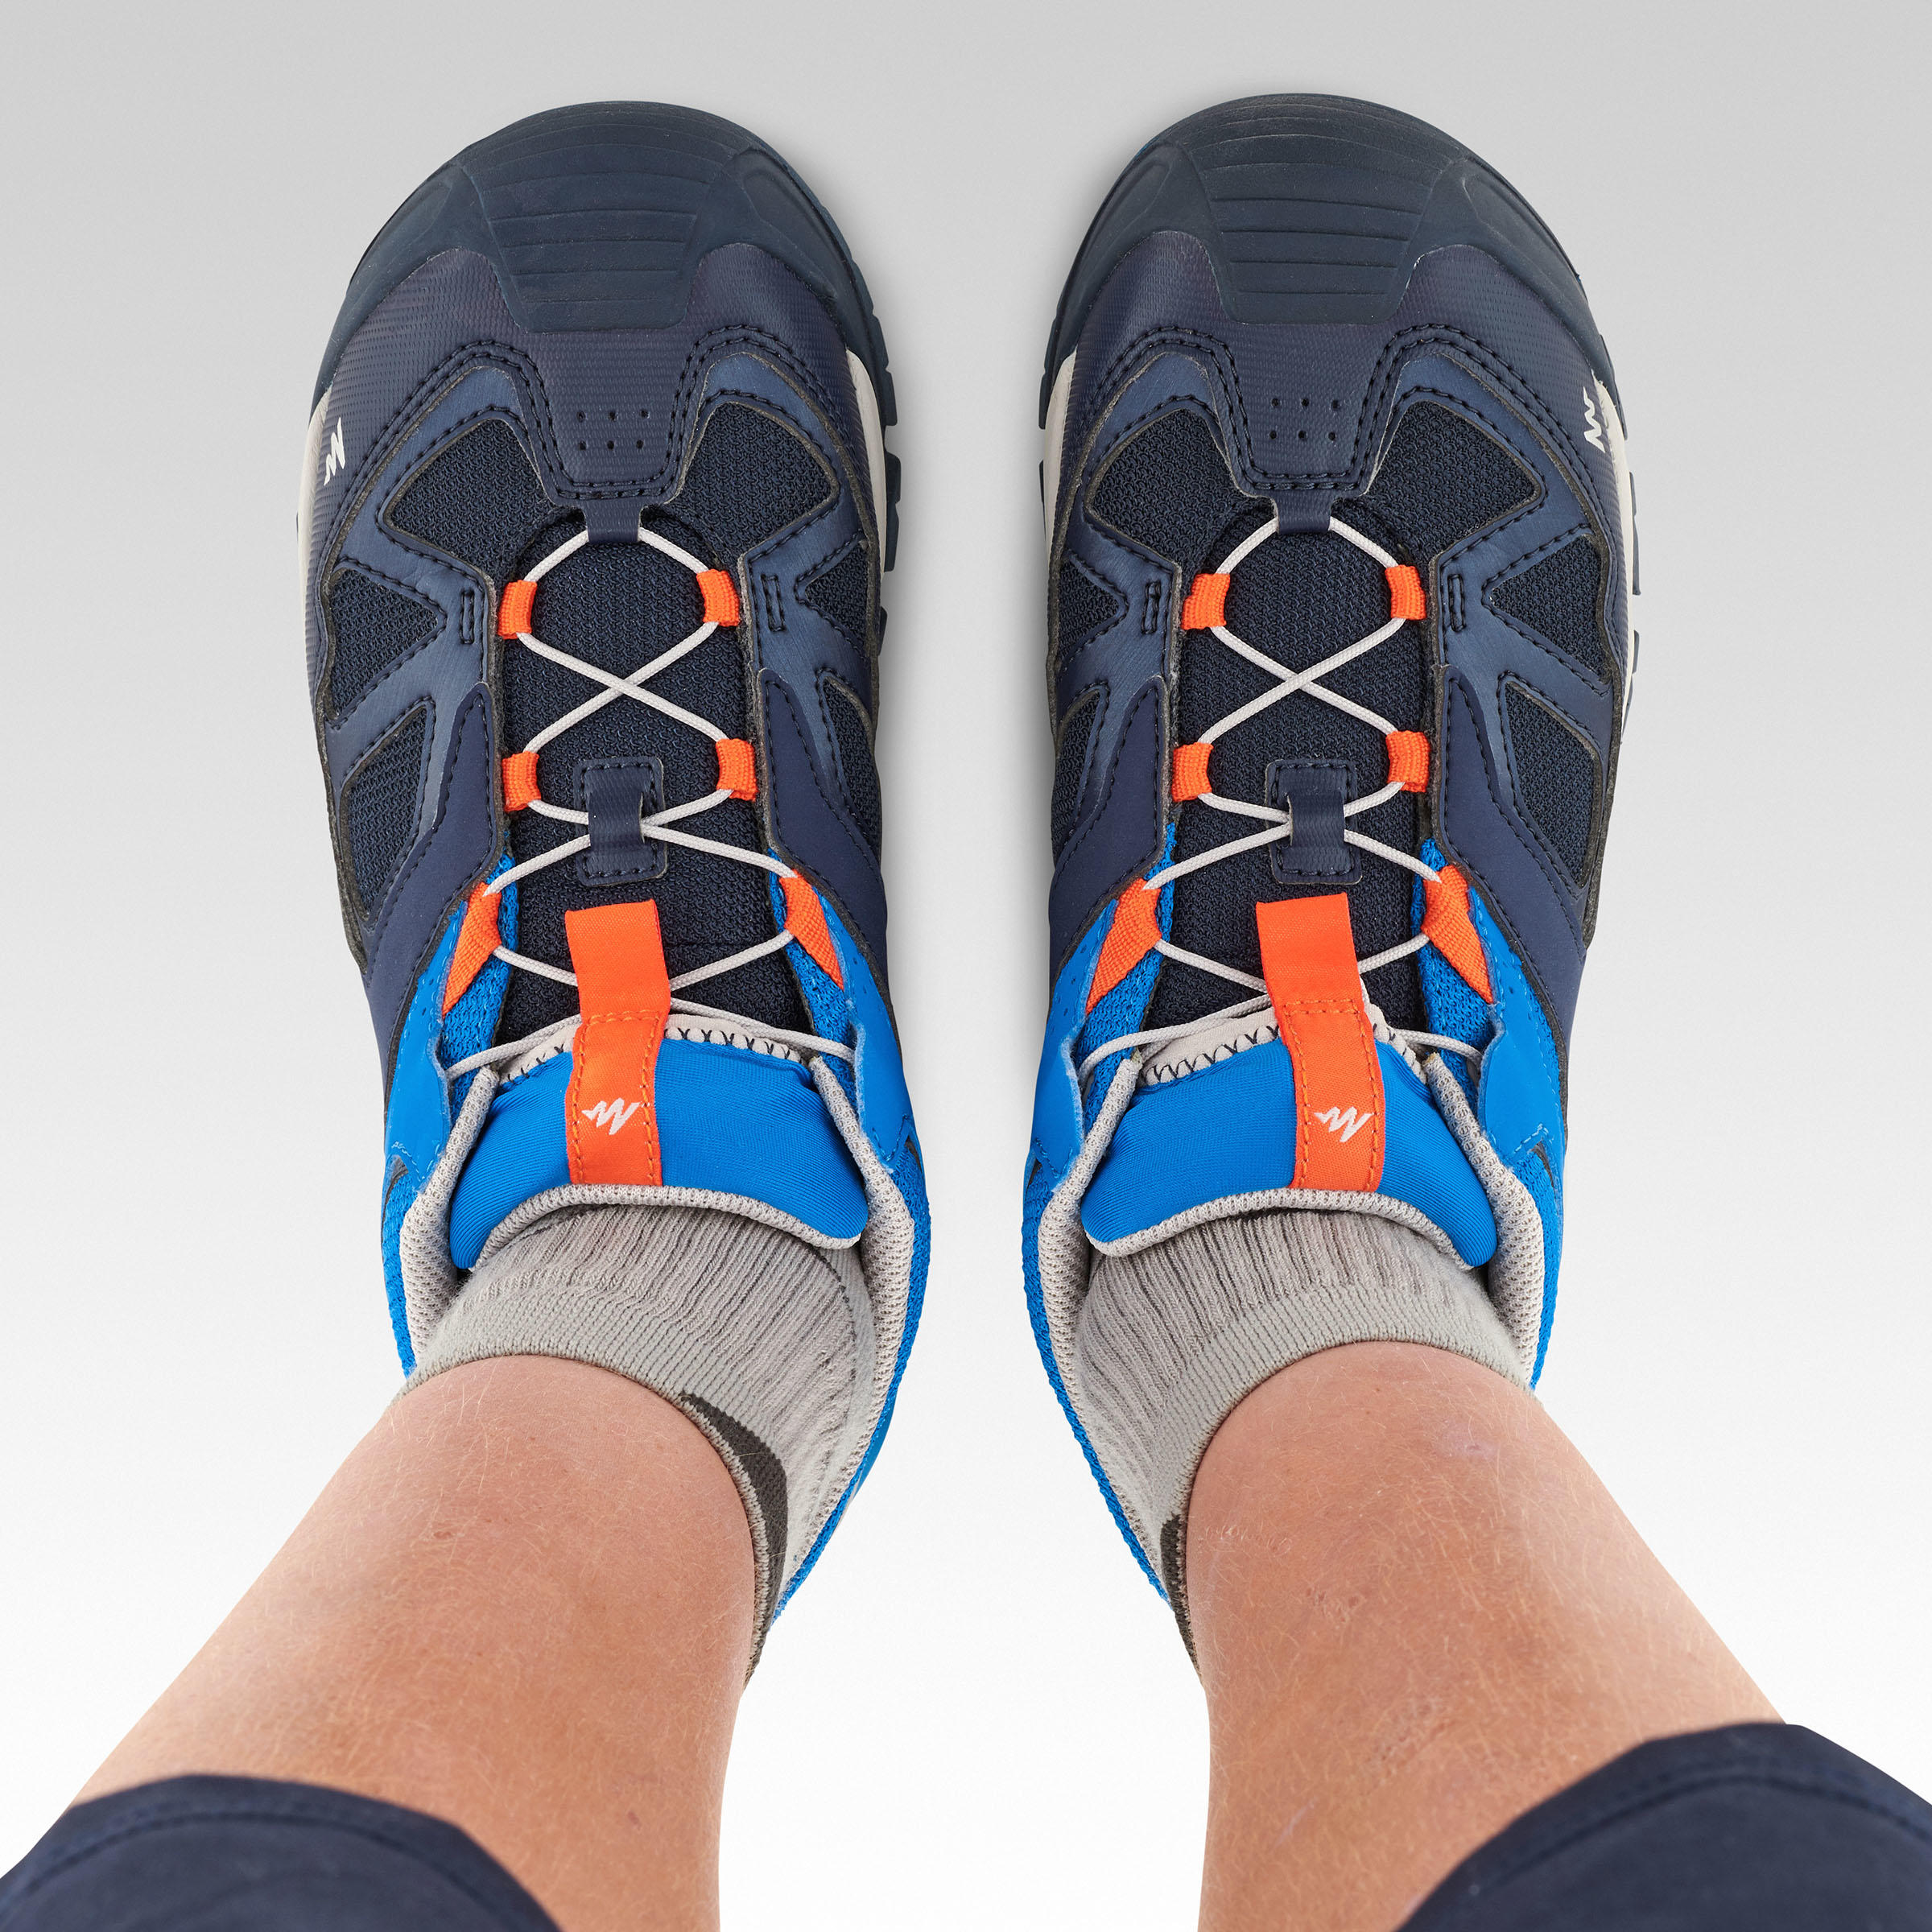 Kids' Low Lace-up Shoes - Sizes 2.5 to 5 - Blue/Orange 6/12